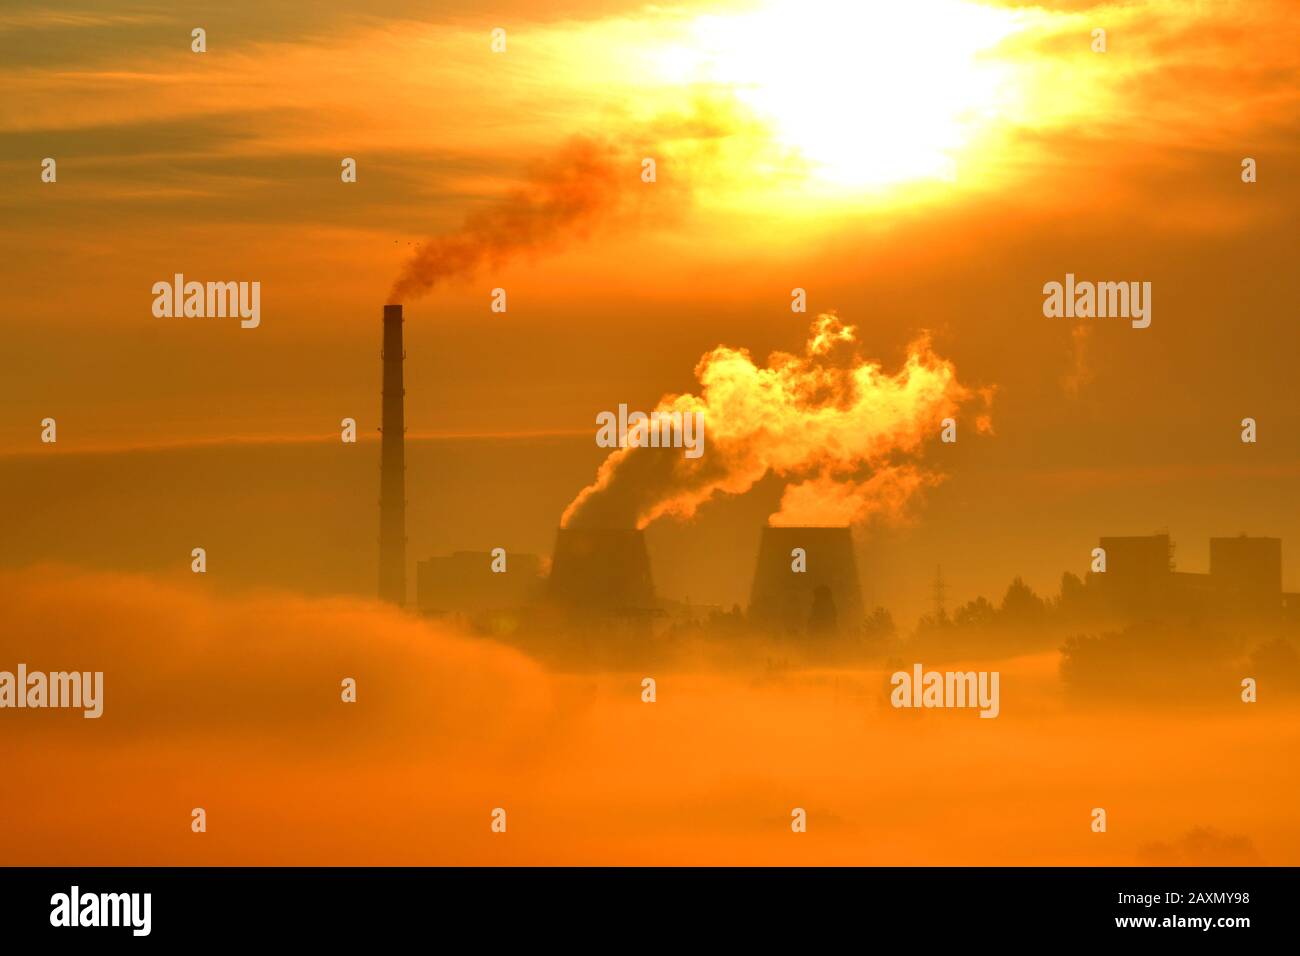 plant with pipes and smoke at sunset dawn. Red, orange cityscape. Landscape with smoke and morning fog. Contrasting the dark silhouette of the plant Stock Photo